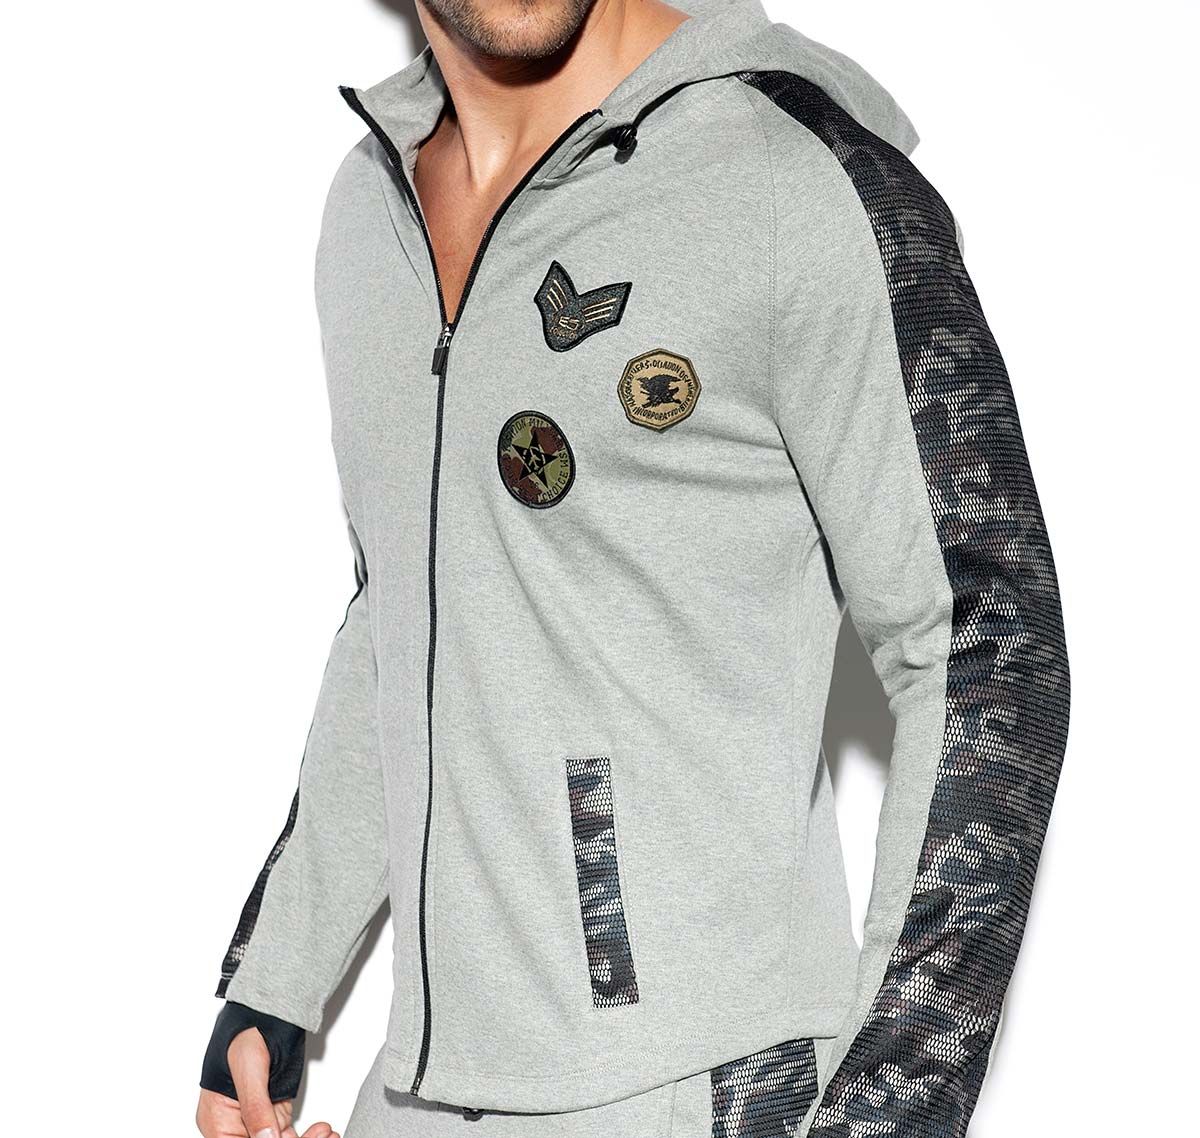 ES Collection Chaqueta con capucha ARMY PADDED SPORT JACKET SP220, gris